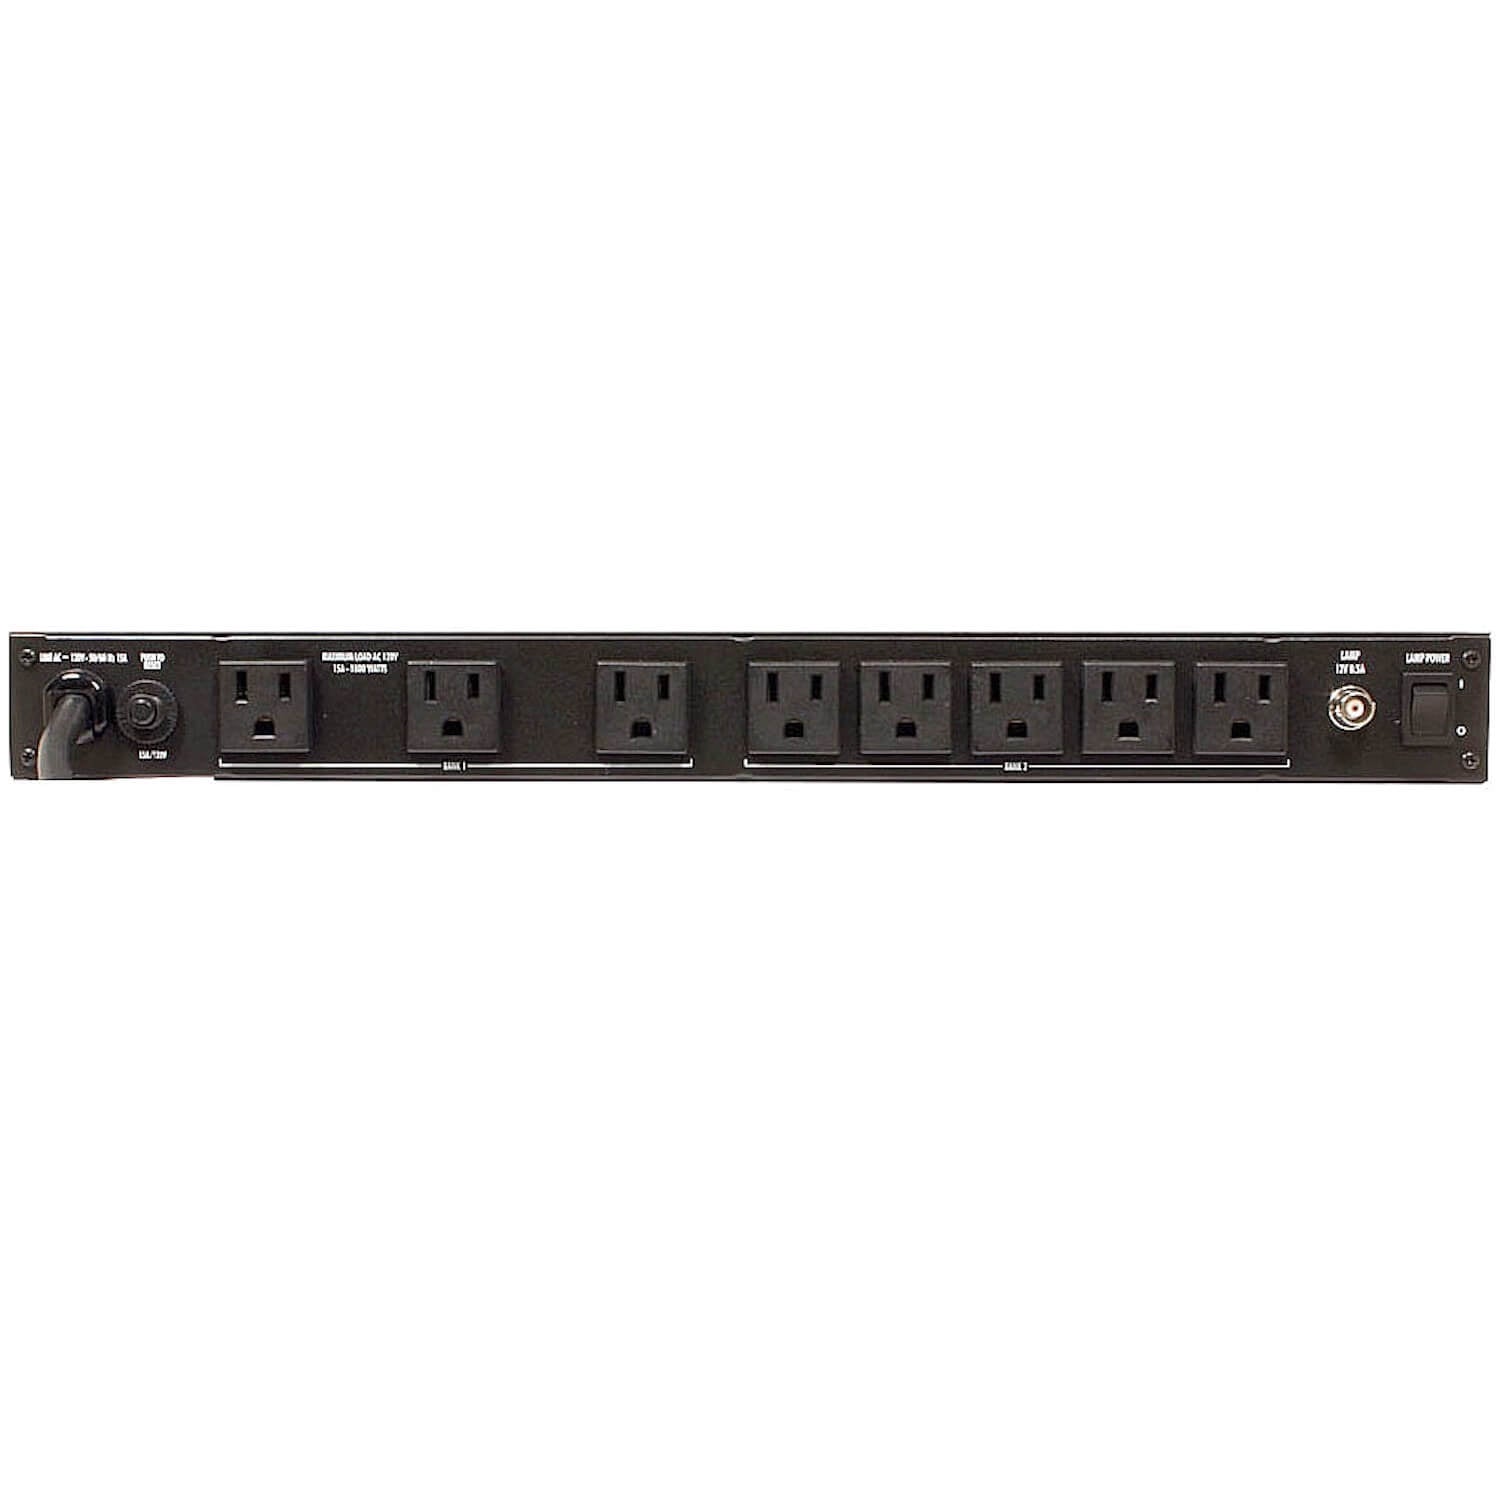 Furman PL-8C - 15A Power Conditioner with Lights, rear